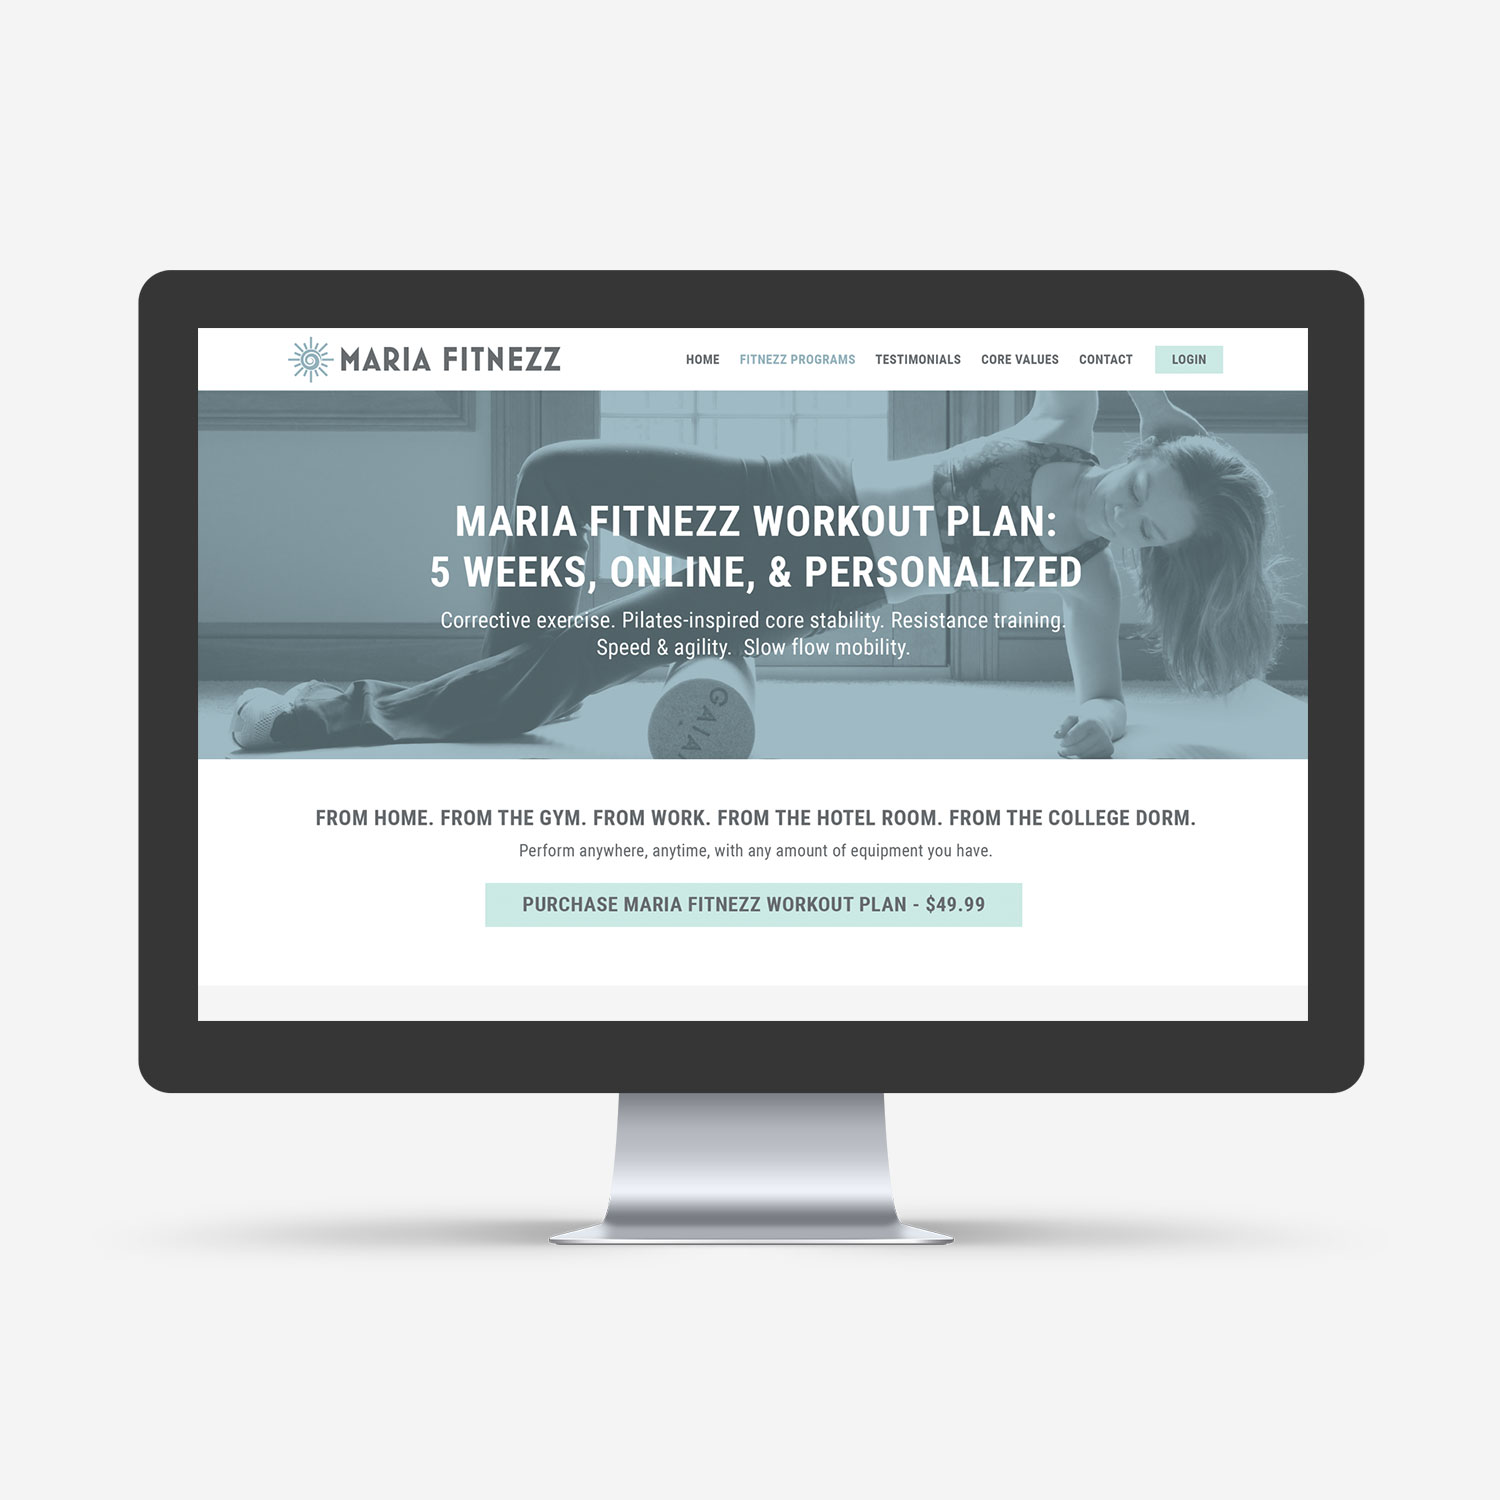 Mockup of the homepage of Maria Fitnezz's new WordPress website